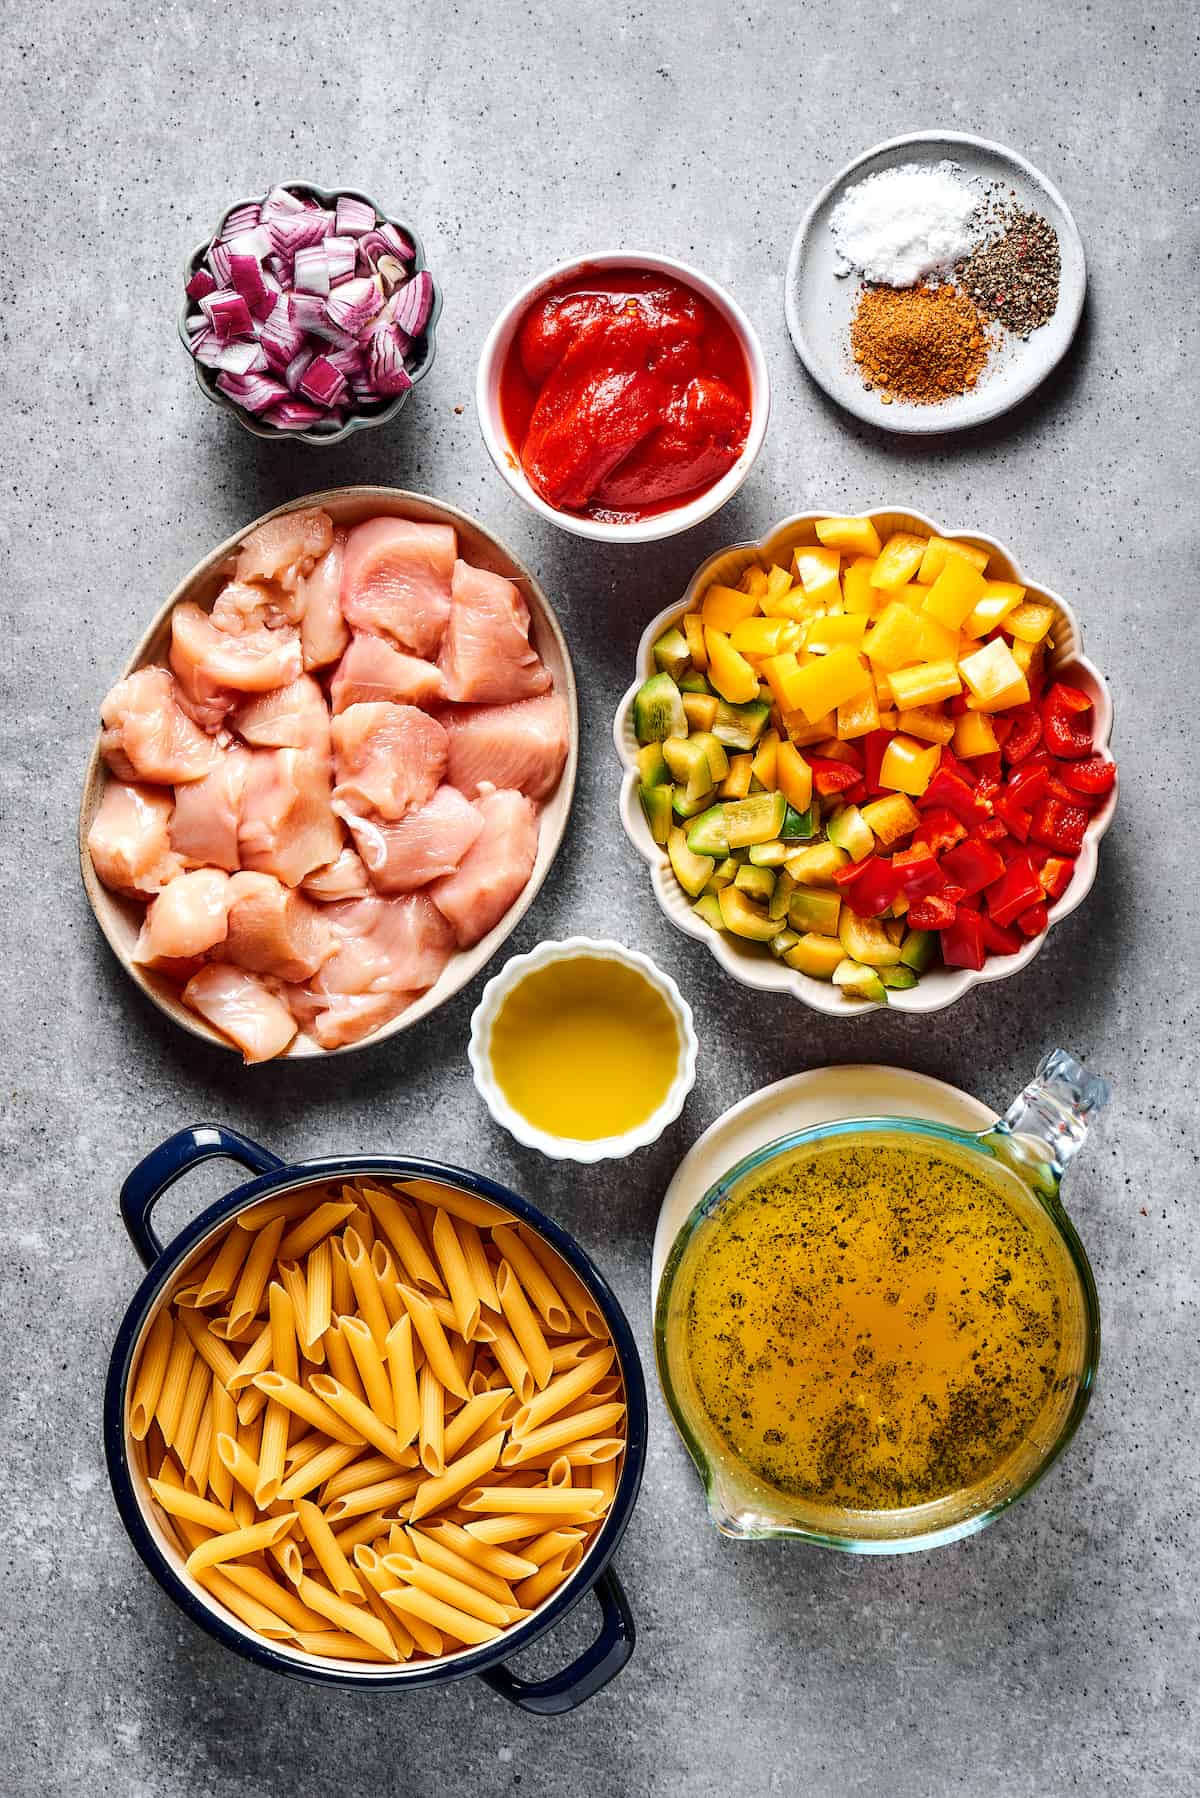 Chicken fajita pasta ingredients measured and arranged in small dishes on a work surface.